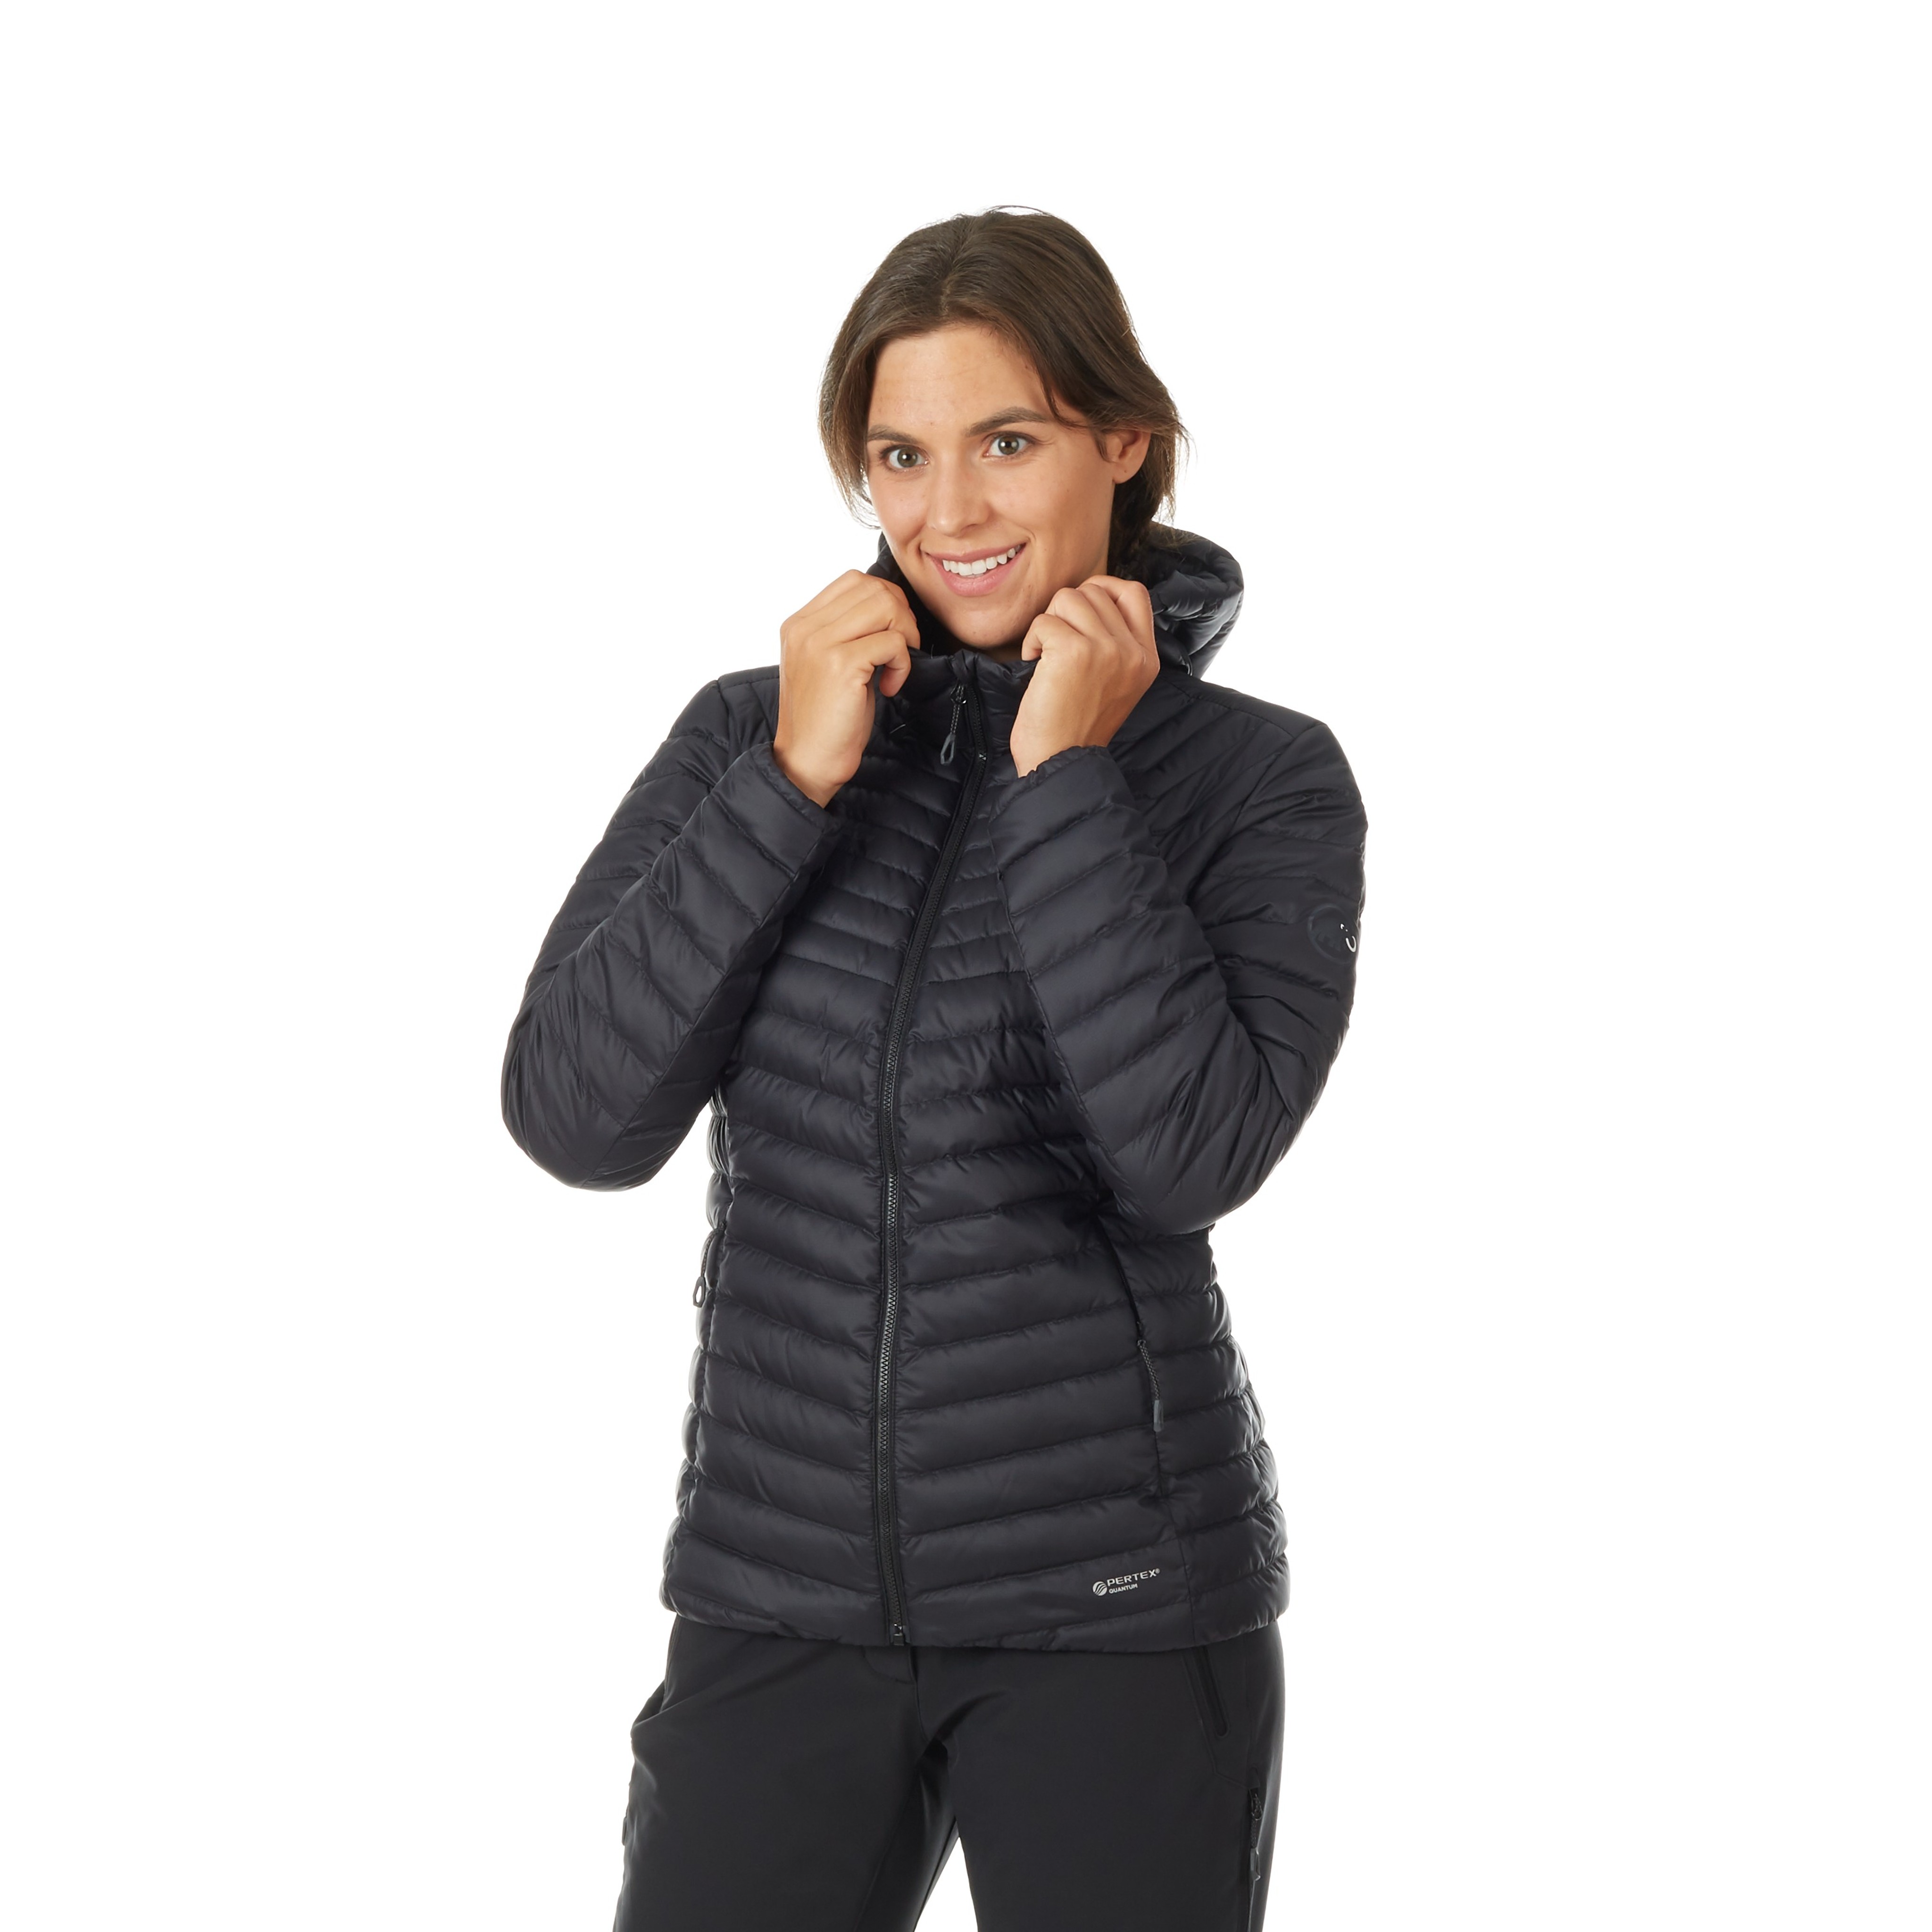 Convey IN Hooded Jacket Women product image